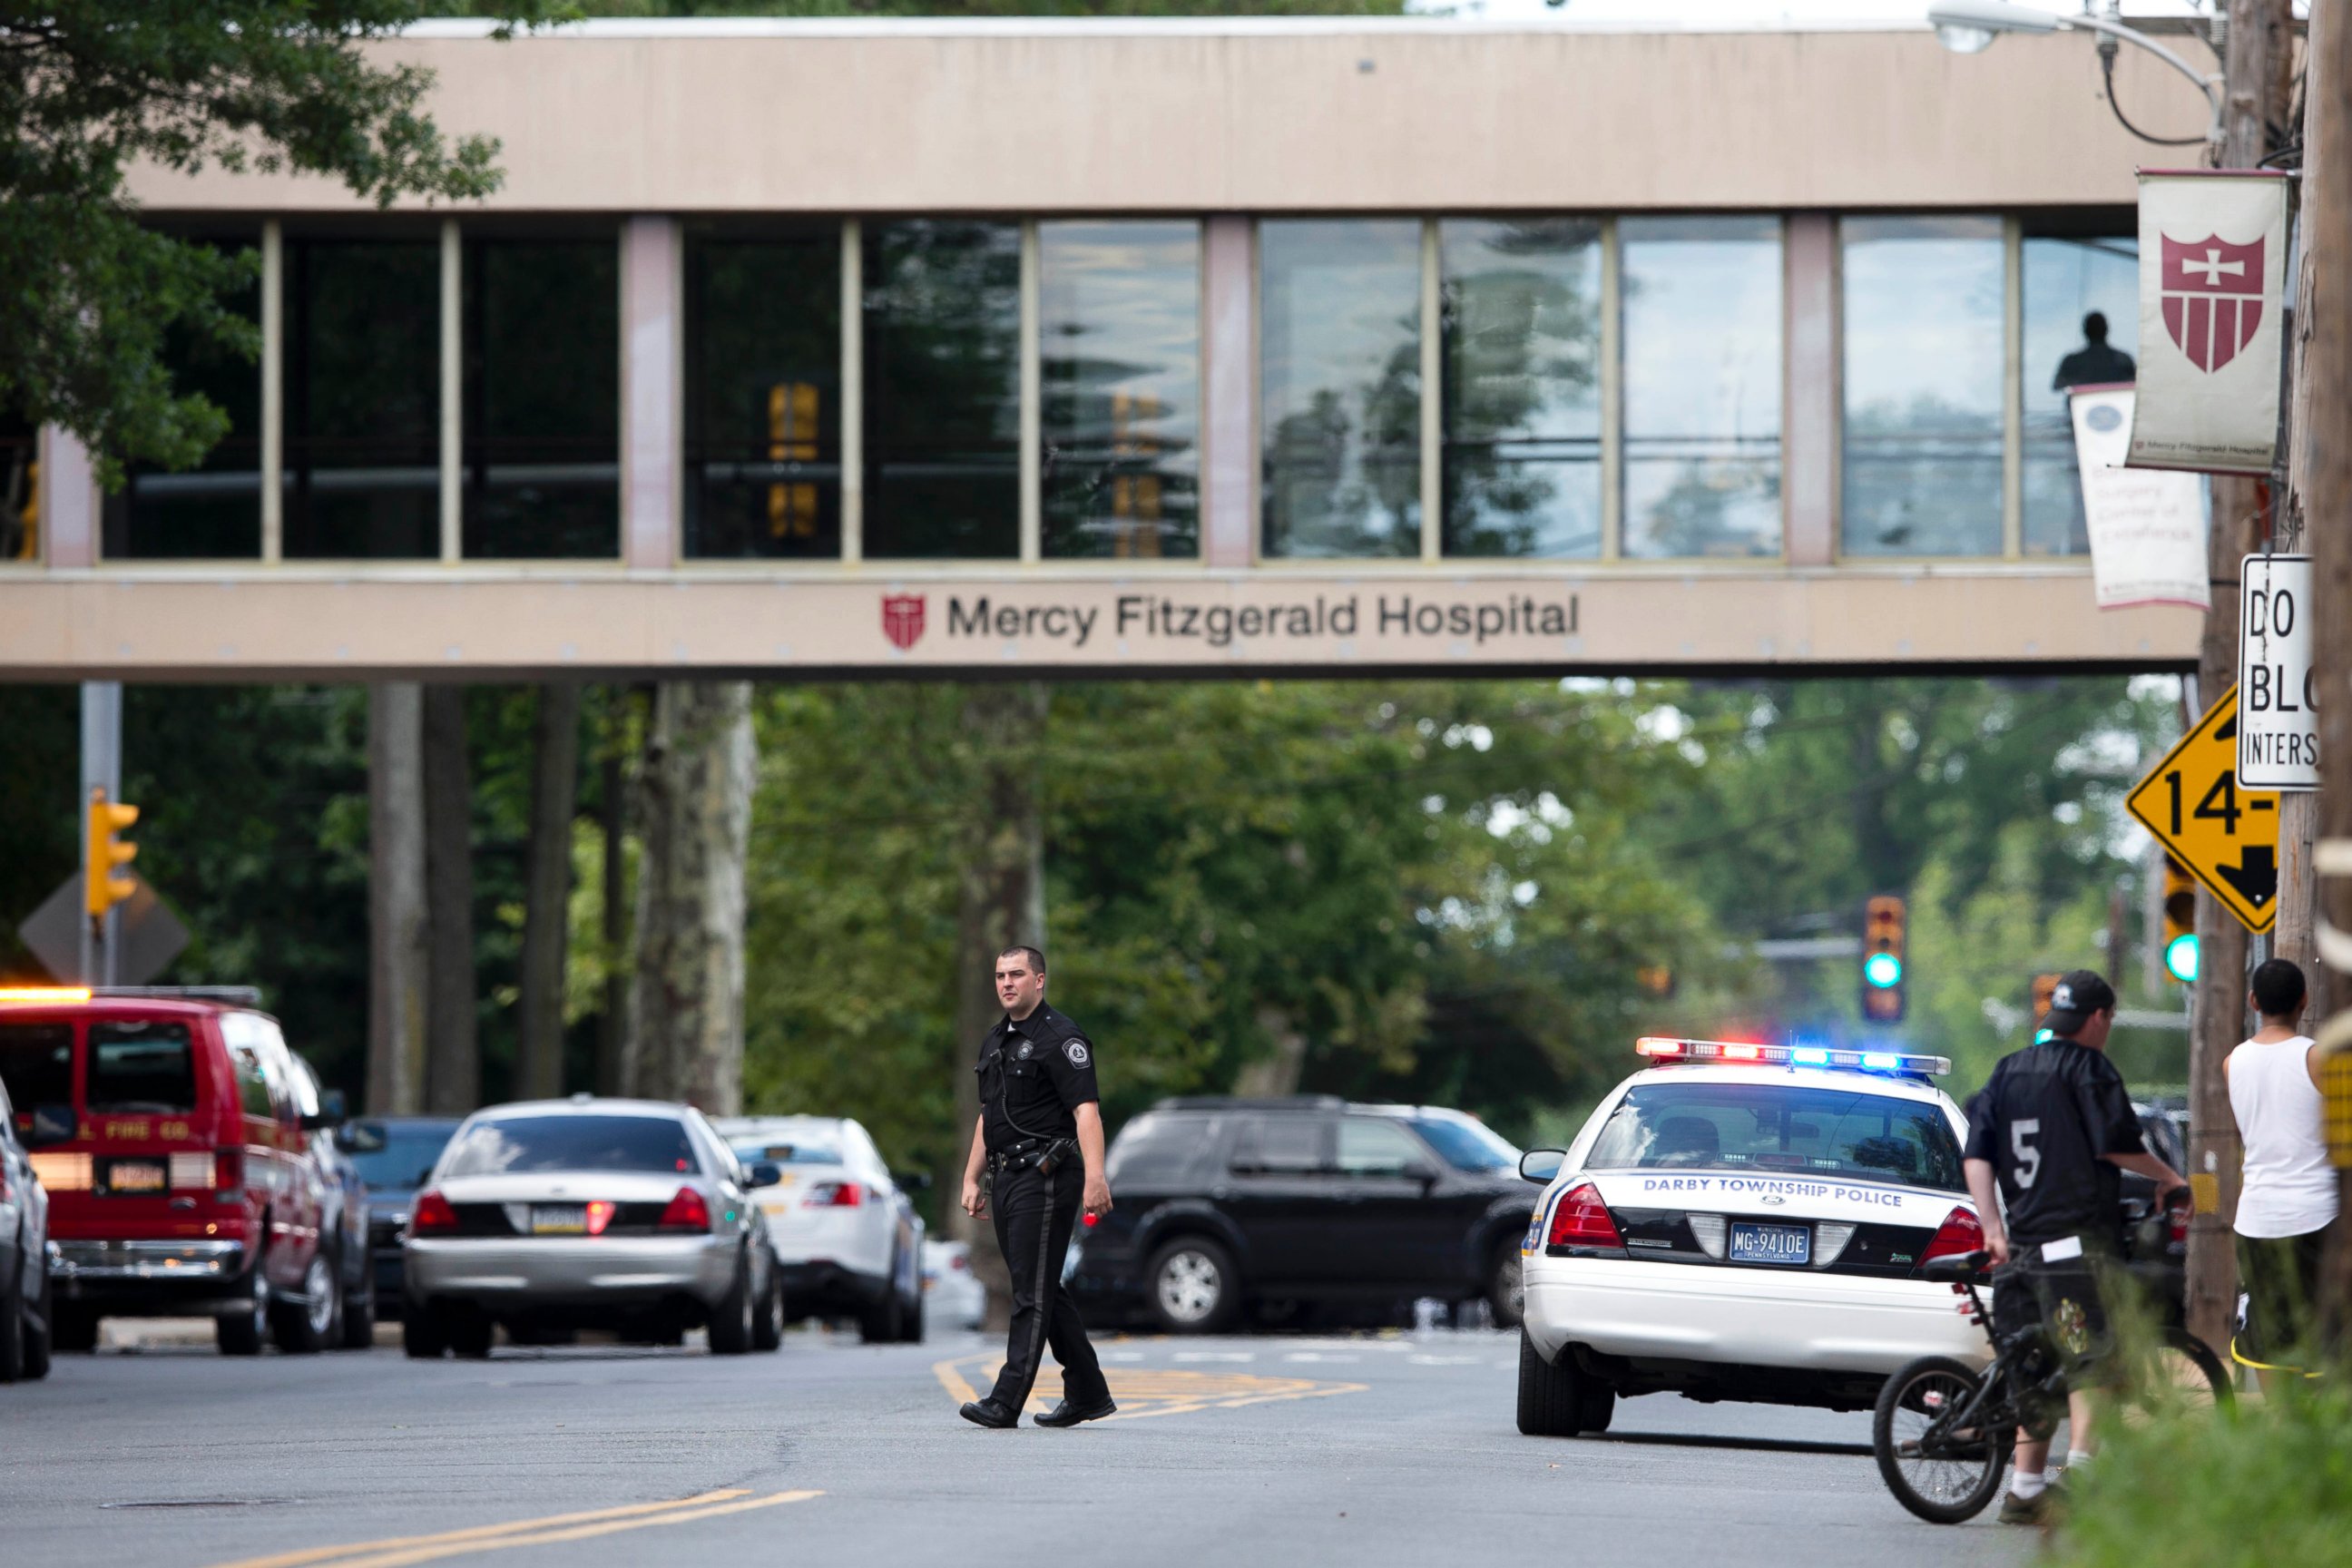 PHOTO: An officer directs traffic near the scene of a shooting Thursday, July 24, 2014, at a wellness center attached to Mercy Fitzgerald Hospital in Darby, Pa. 